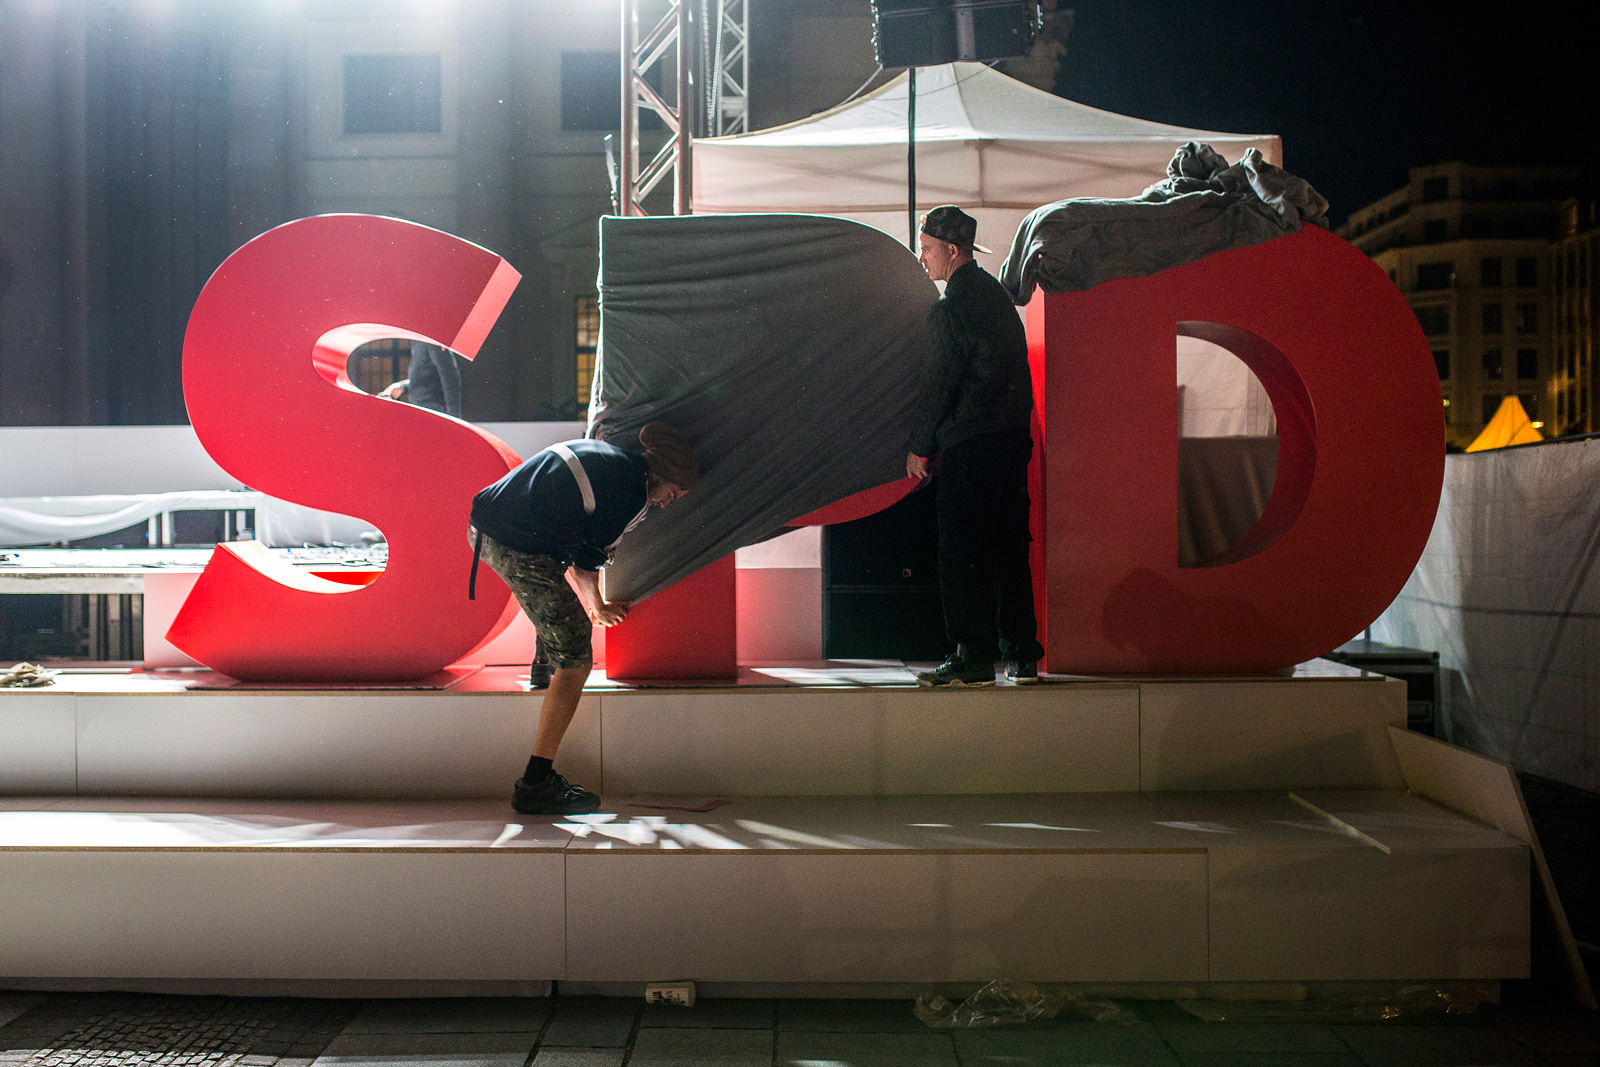 Stage crew members covering the Social Democratic Party of Germany (SPD) logo after a campaign event, Gendarmenmarkt Square, Berlin, September 22, 2017